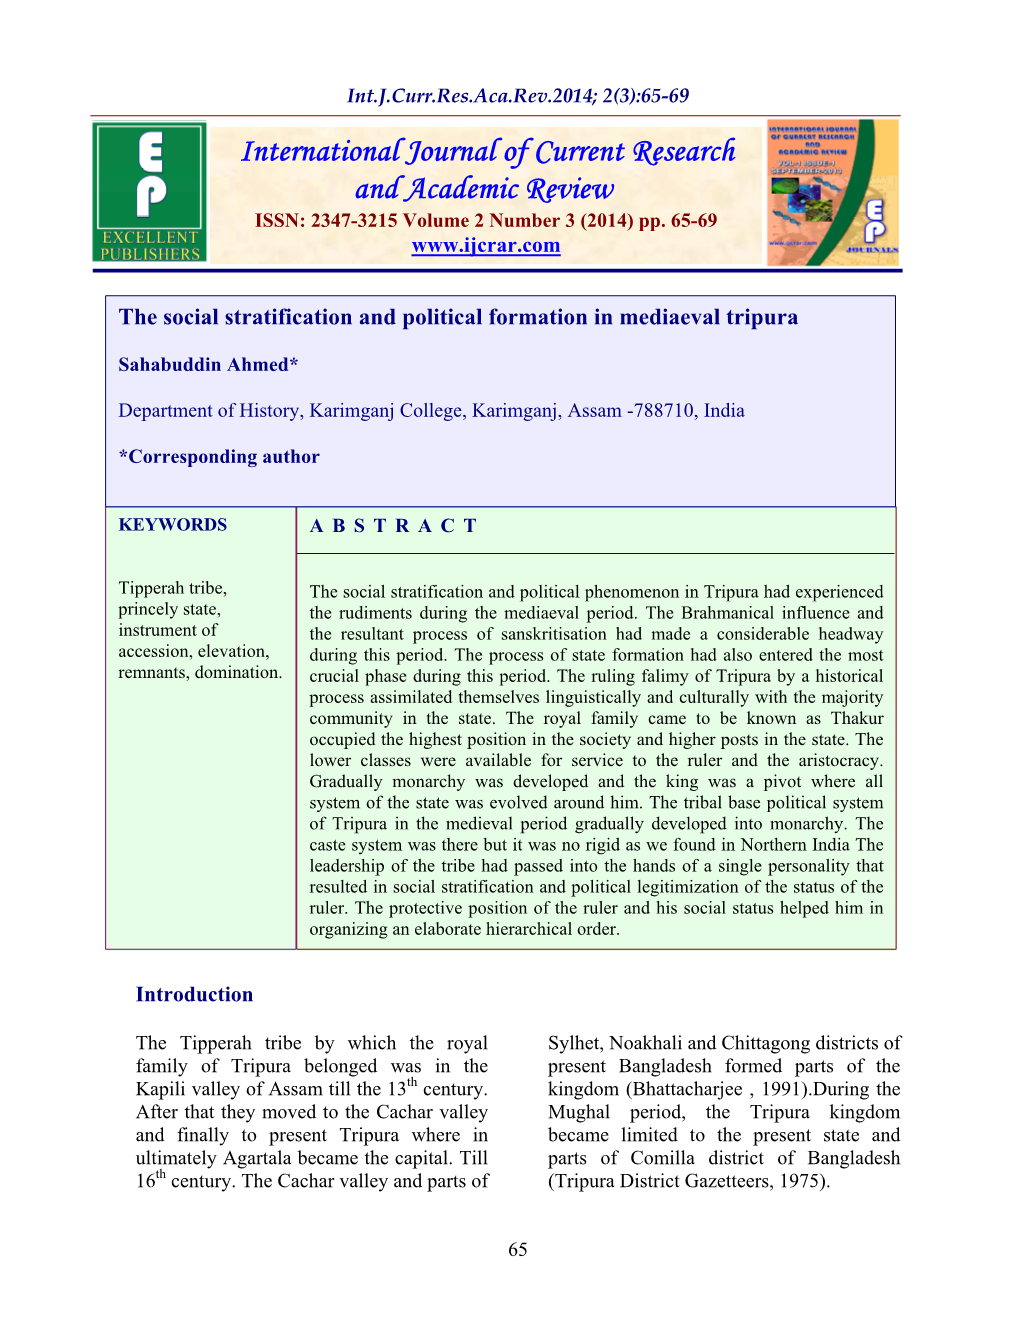 The Social Stratification and Political Formation in Mediaeval Tripura